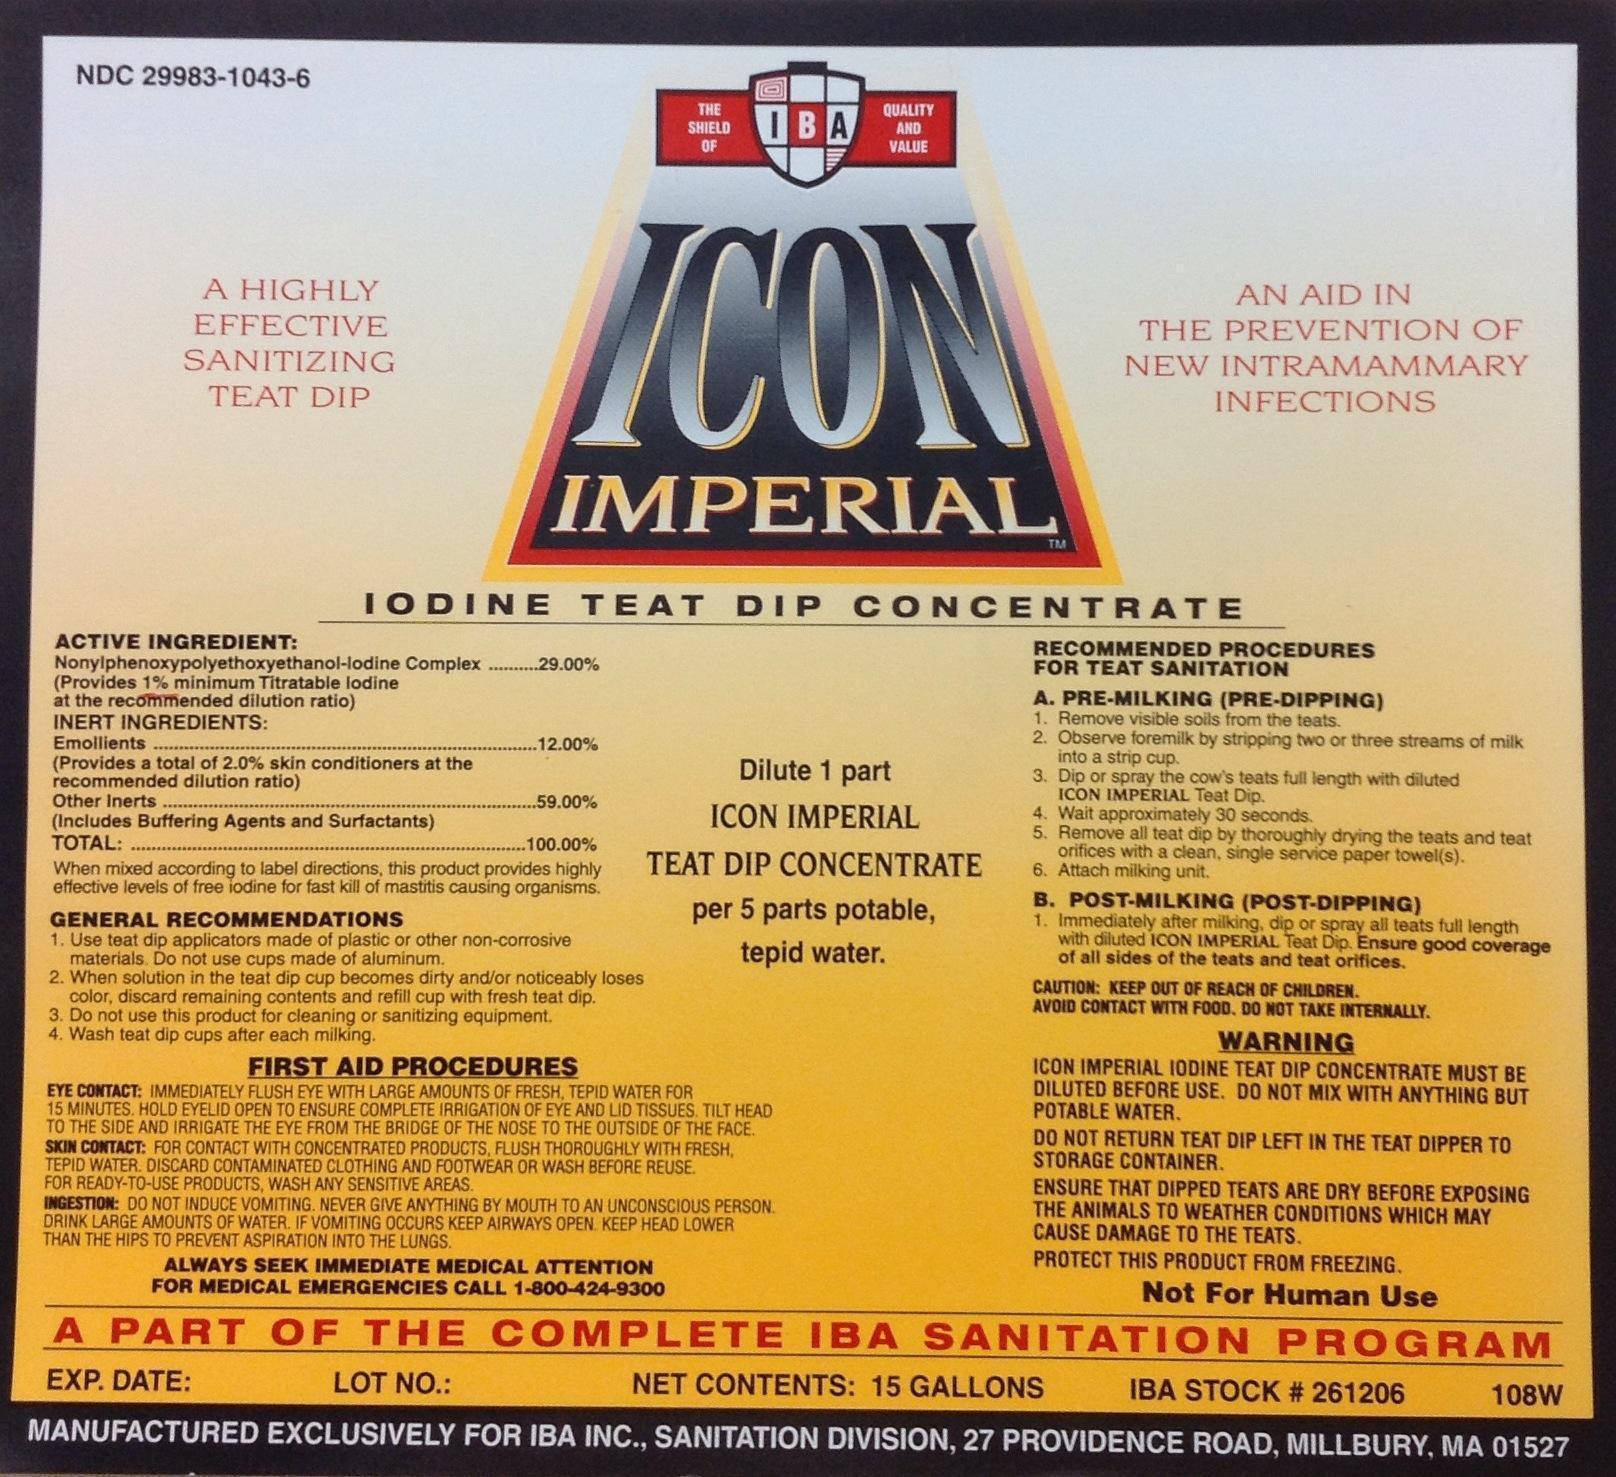 ICON IMPERIAL